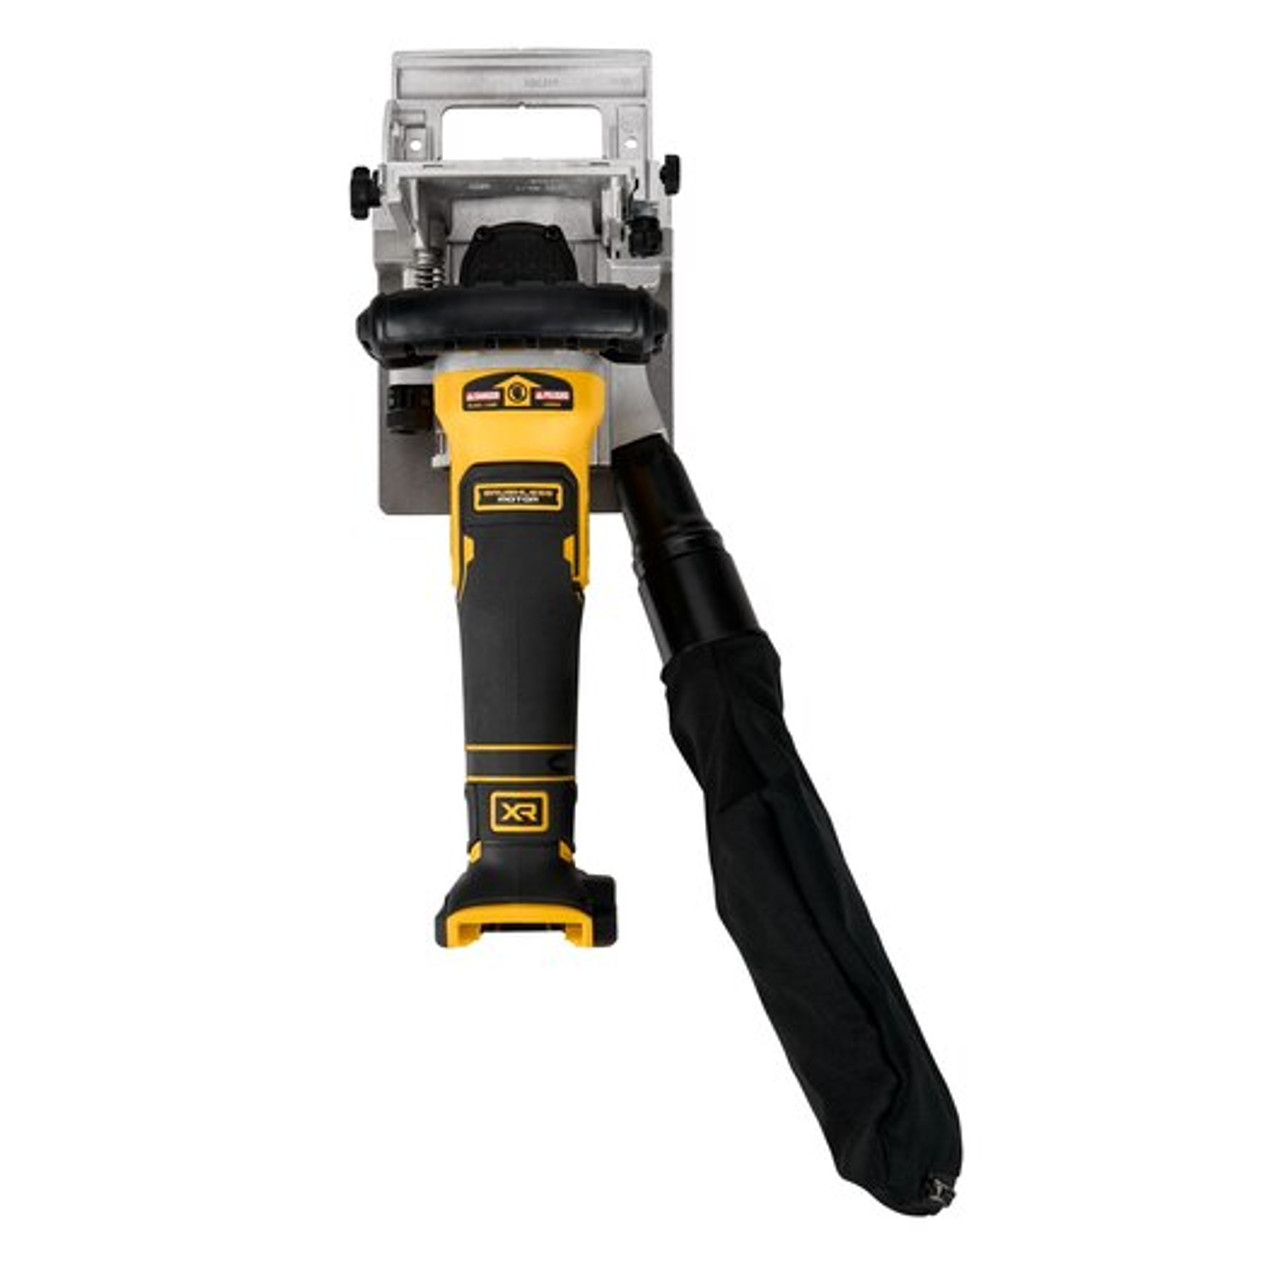 DEWALT DEW-DCW682B 20V MAX XR Brushless Cordless Biscuit Joiner (Tool Only)  Atlas-Machinery